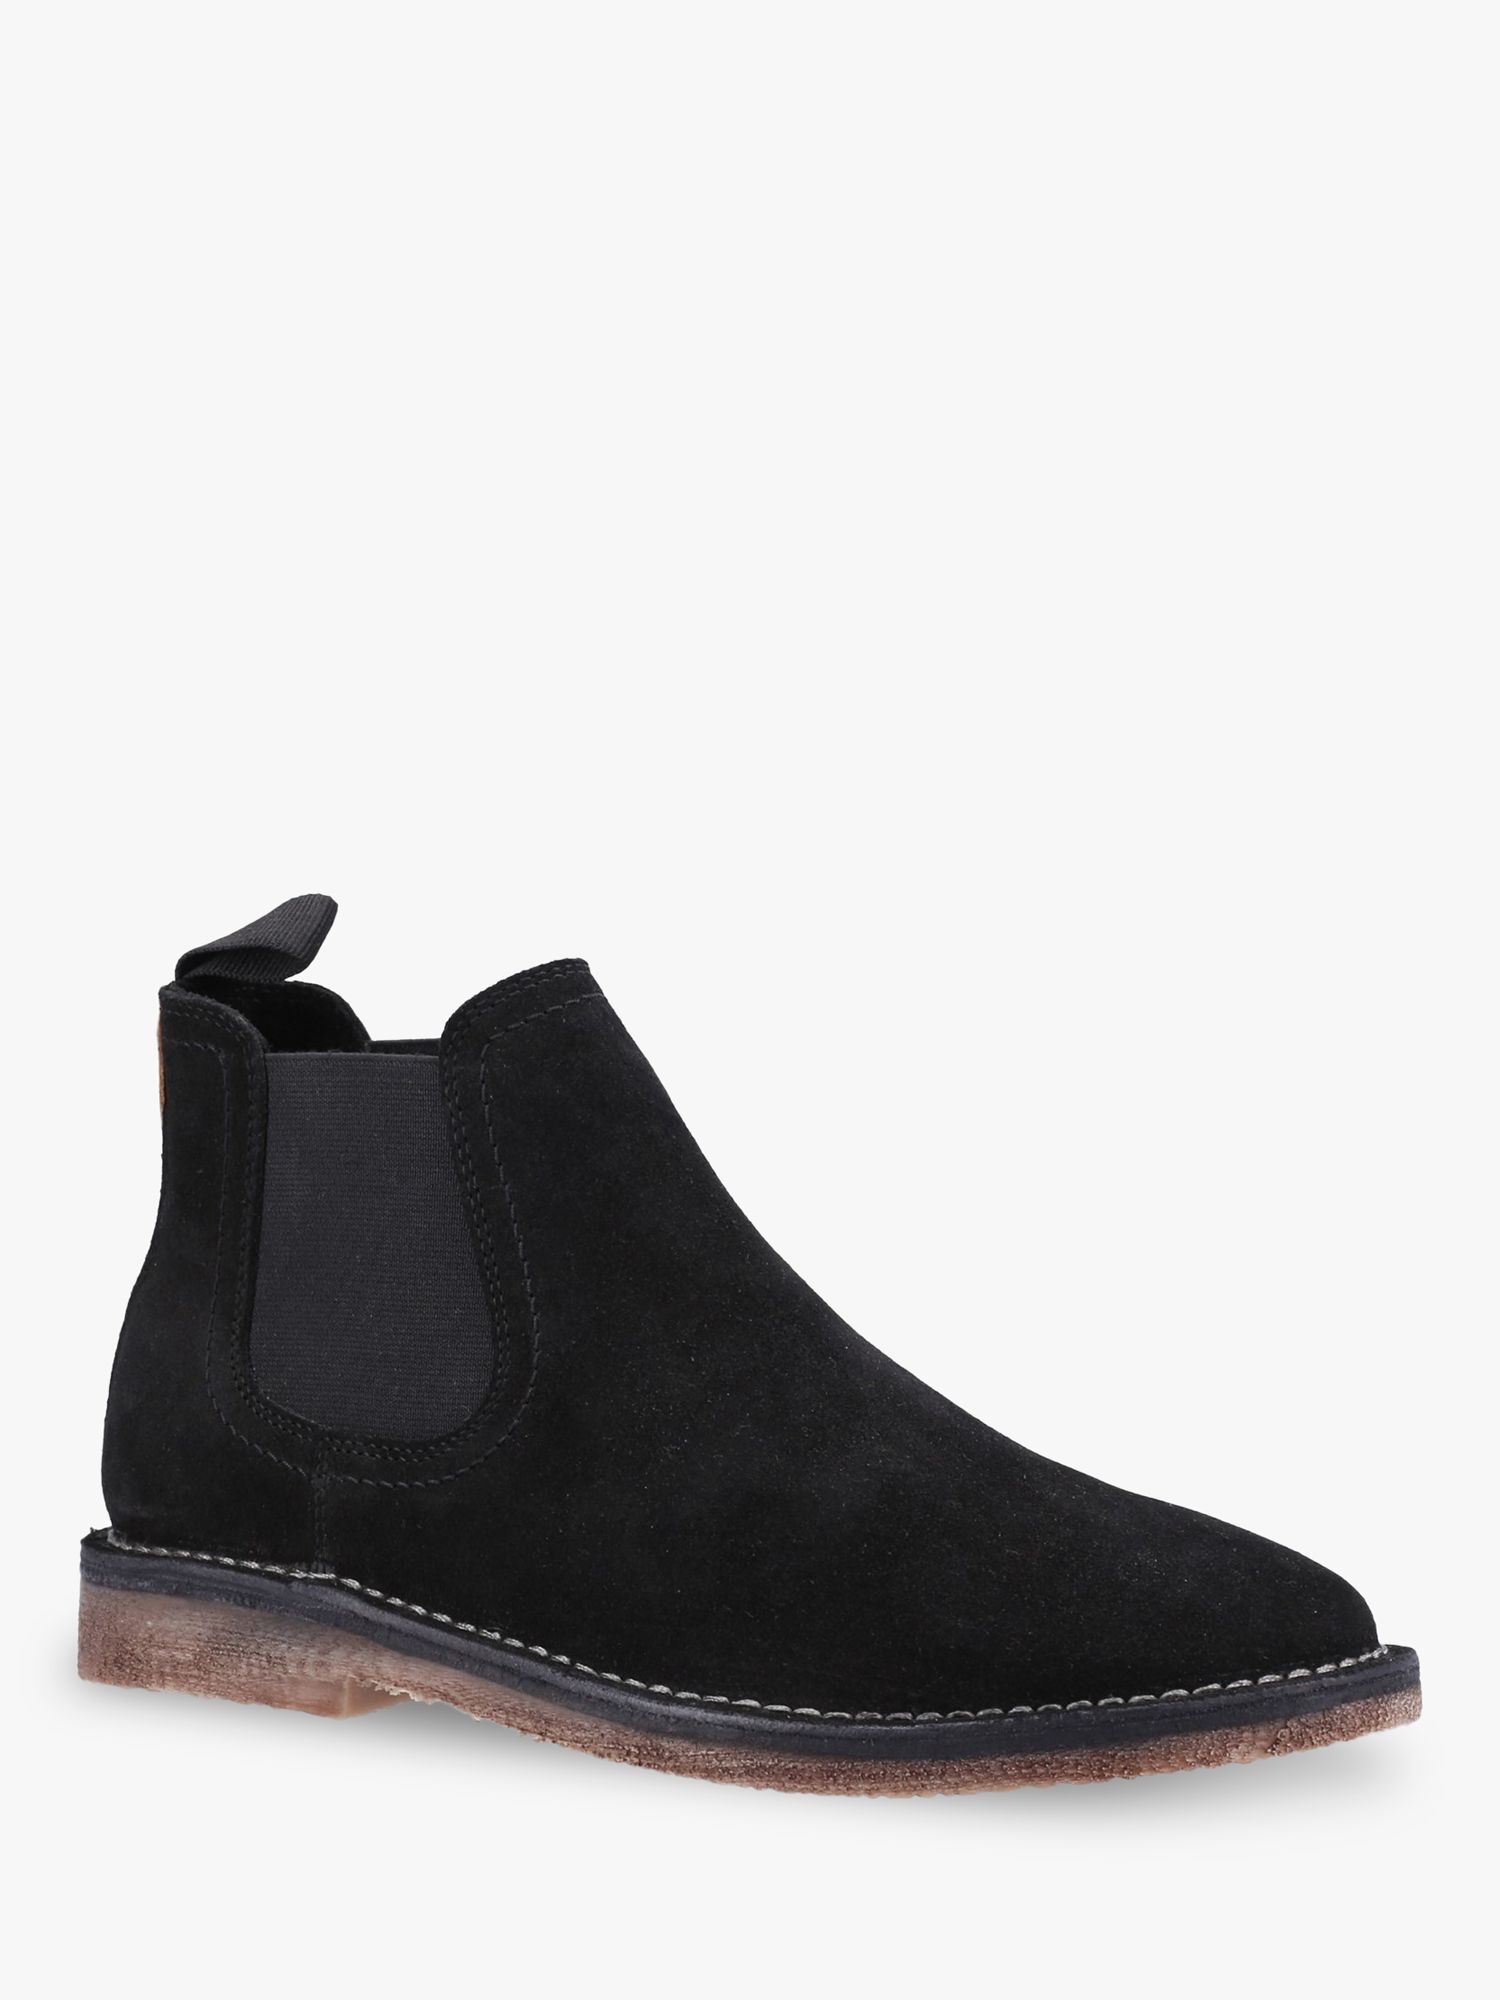 Hush Puppies Shaun Suede Chelsea Boots, Black at John Lewis & Partners